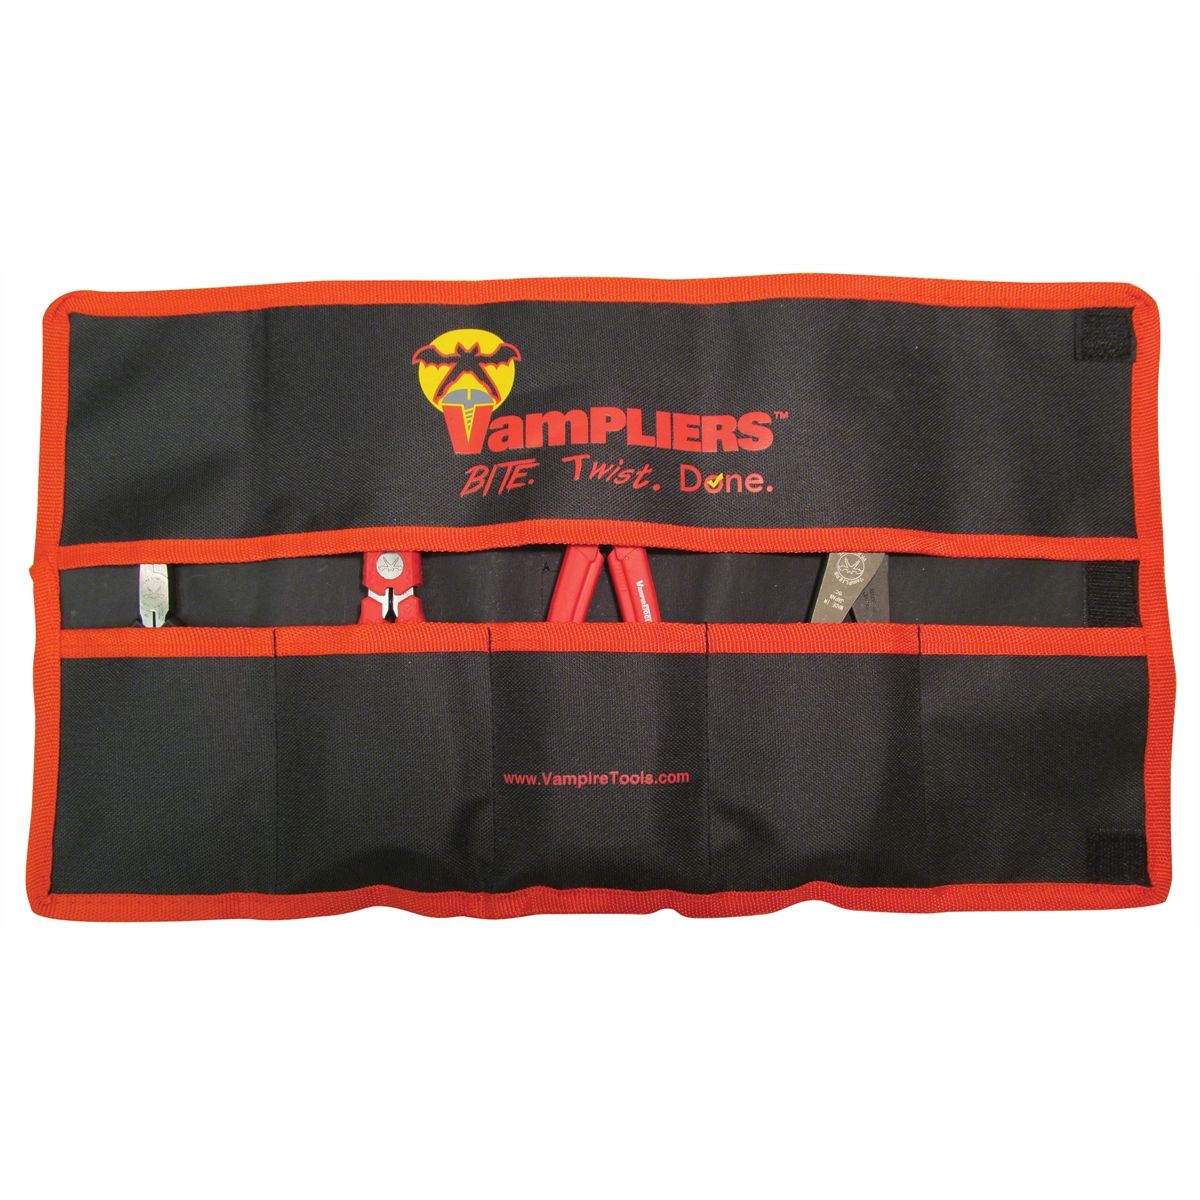 VAMPLIERS TOOL POUCH